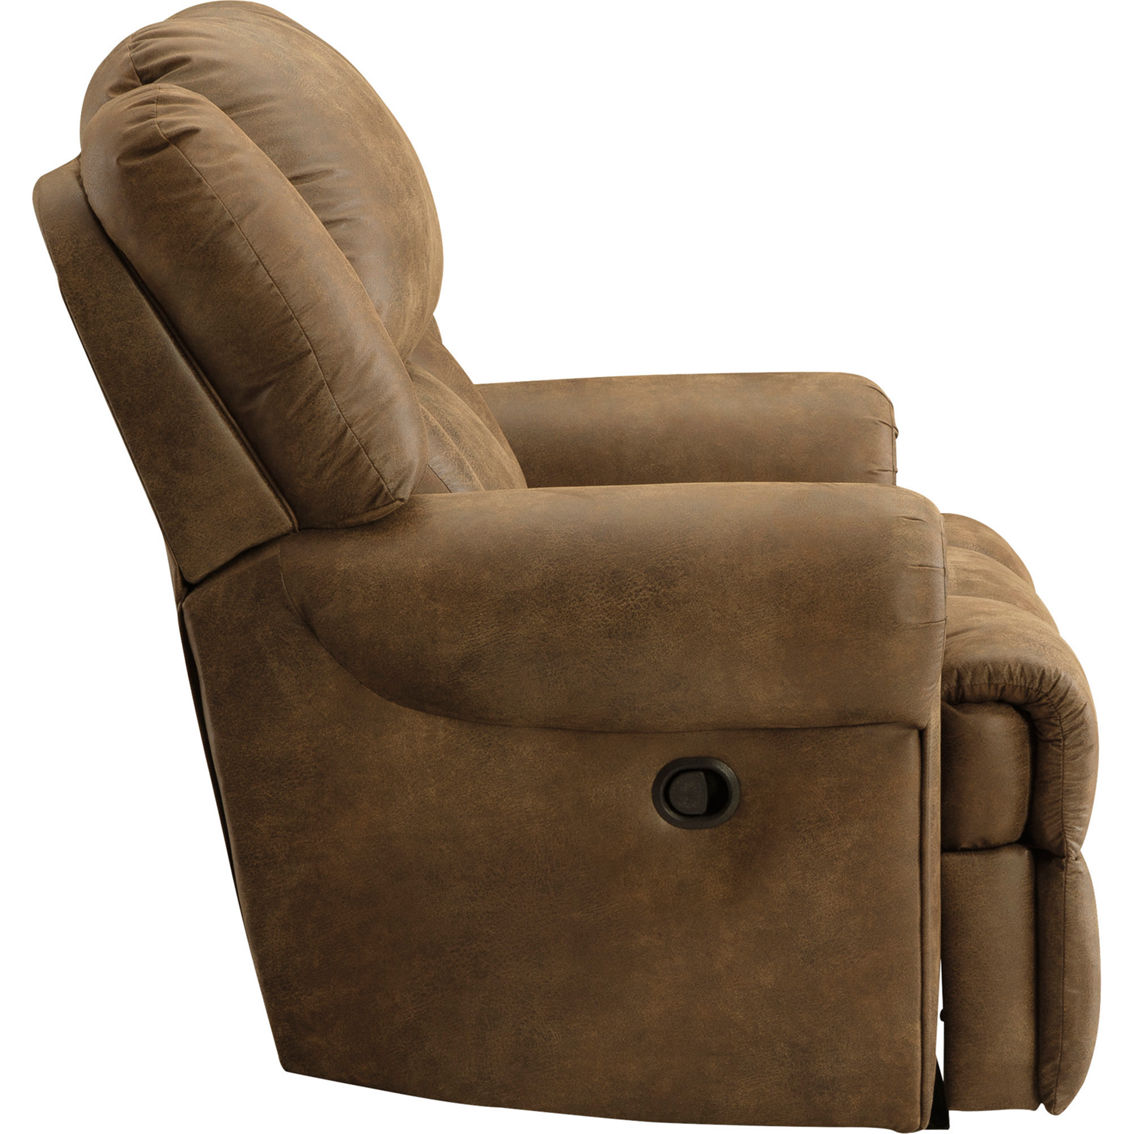 Signature Design by Ashley Boothbay Oversized Recliner - Image 5 of 8